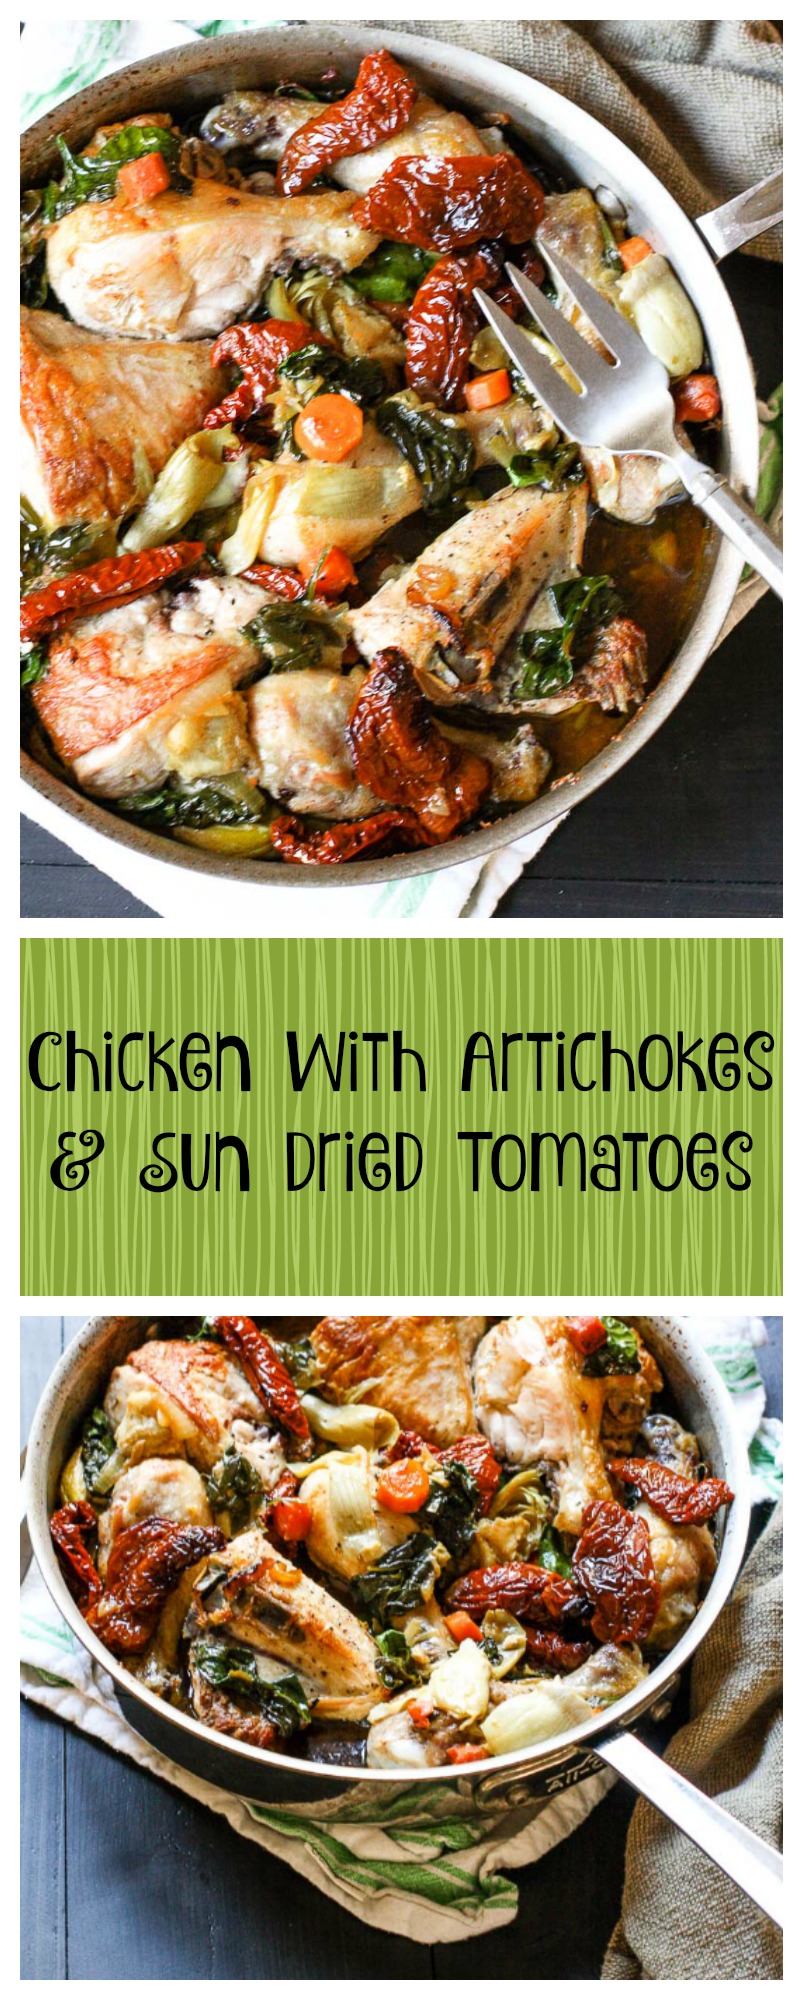 chicken with artichokes and sun dried tomatoes